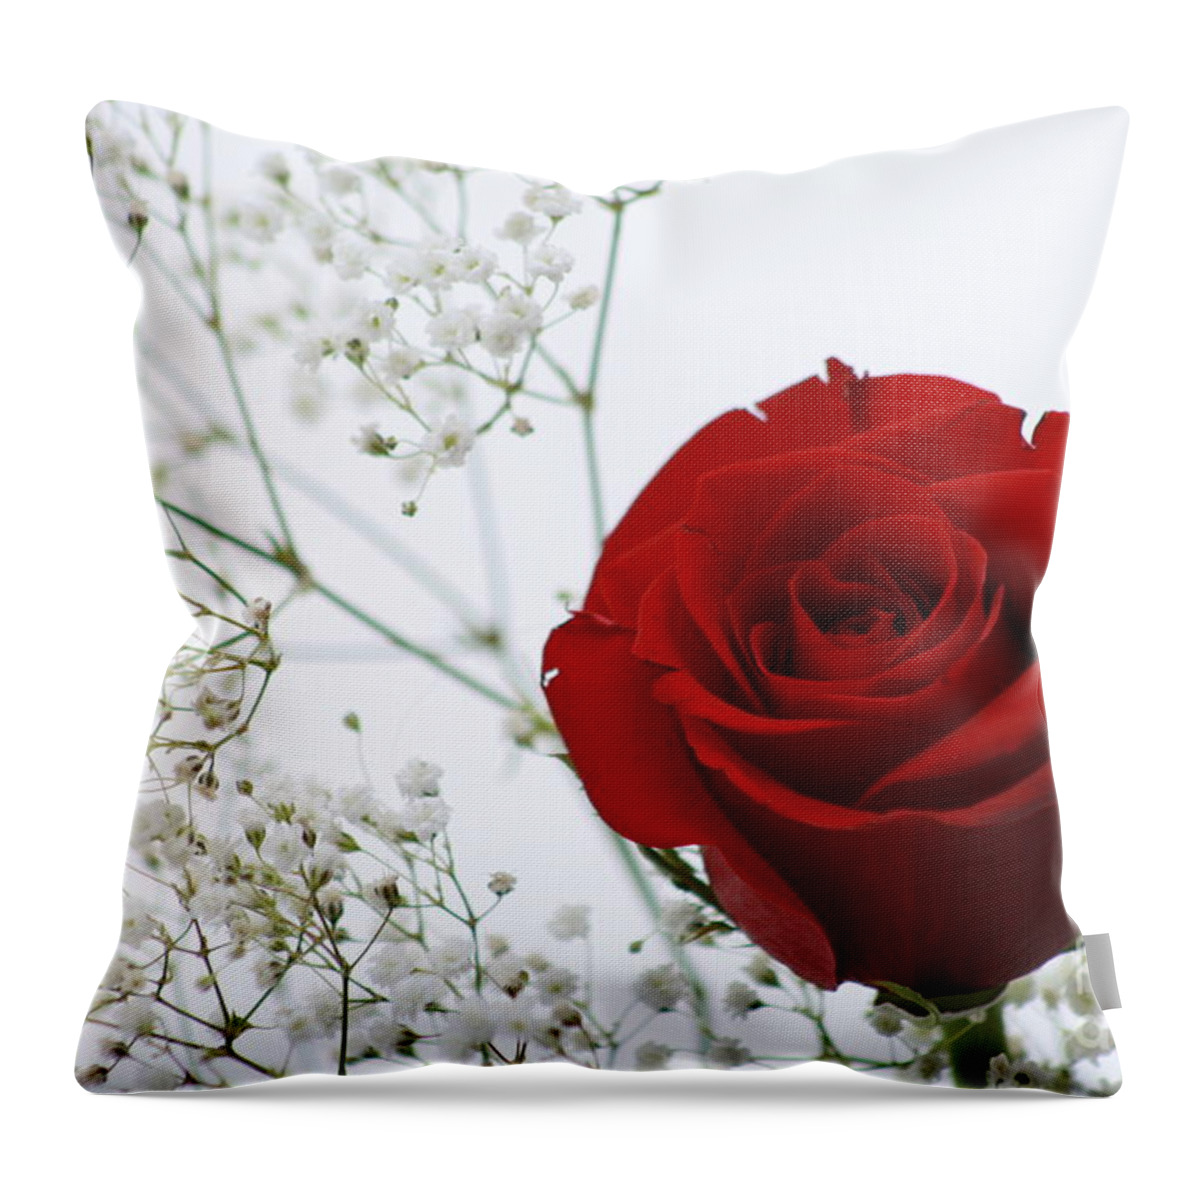 Flower Throw Pillow featuring the photograph For You by Rick Monyahan